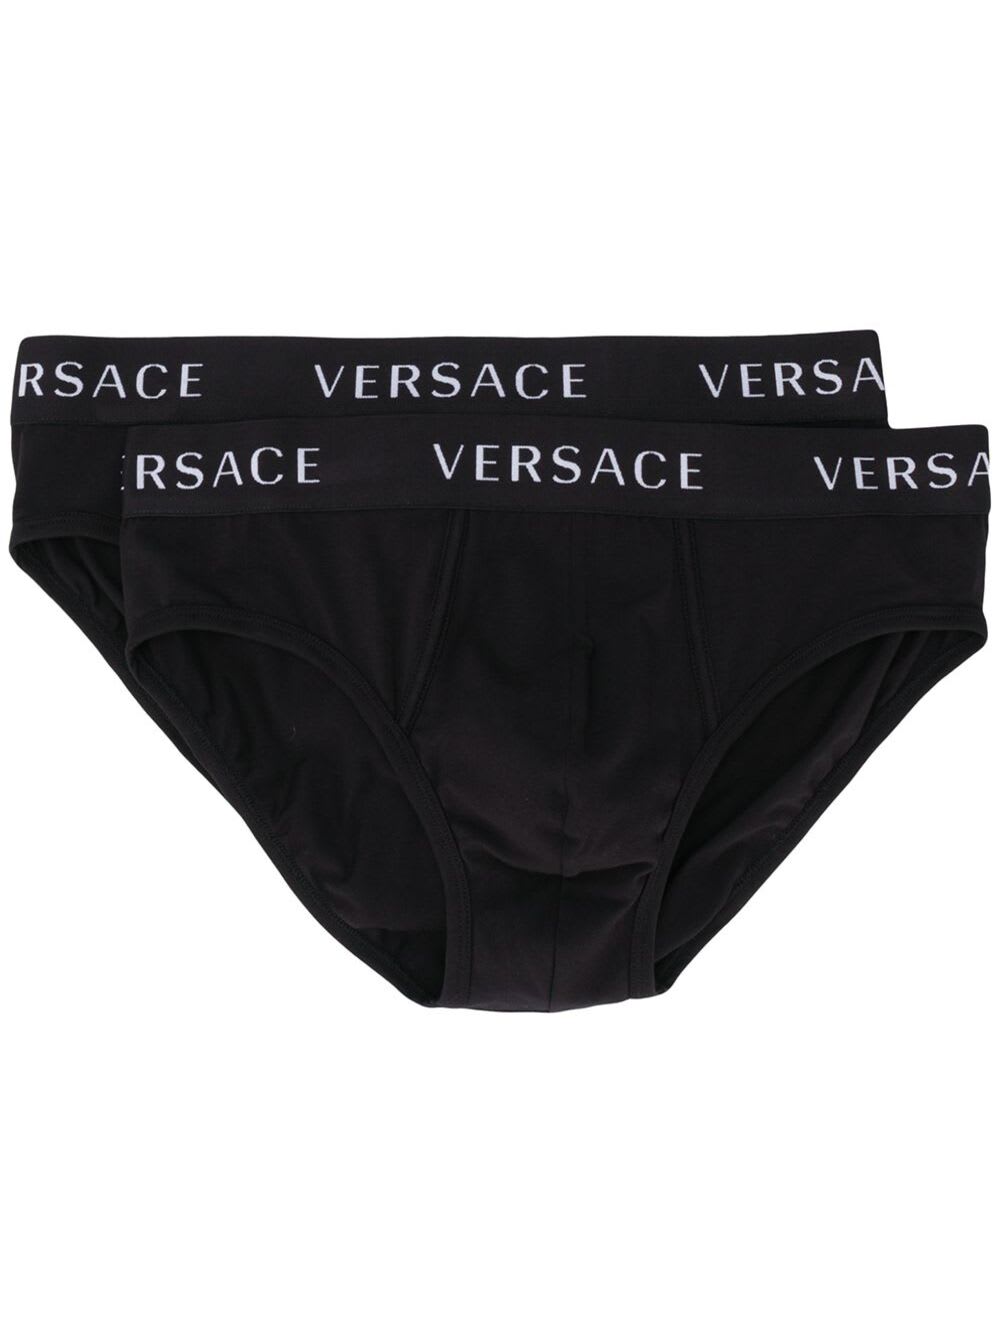 VERSACE VERSACE MAN S TWO BLACK COTTON BRIEFS WITH LOGO